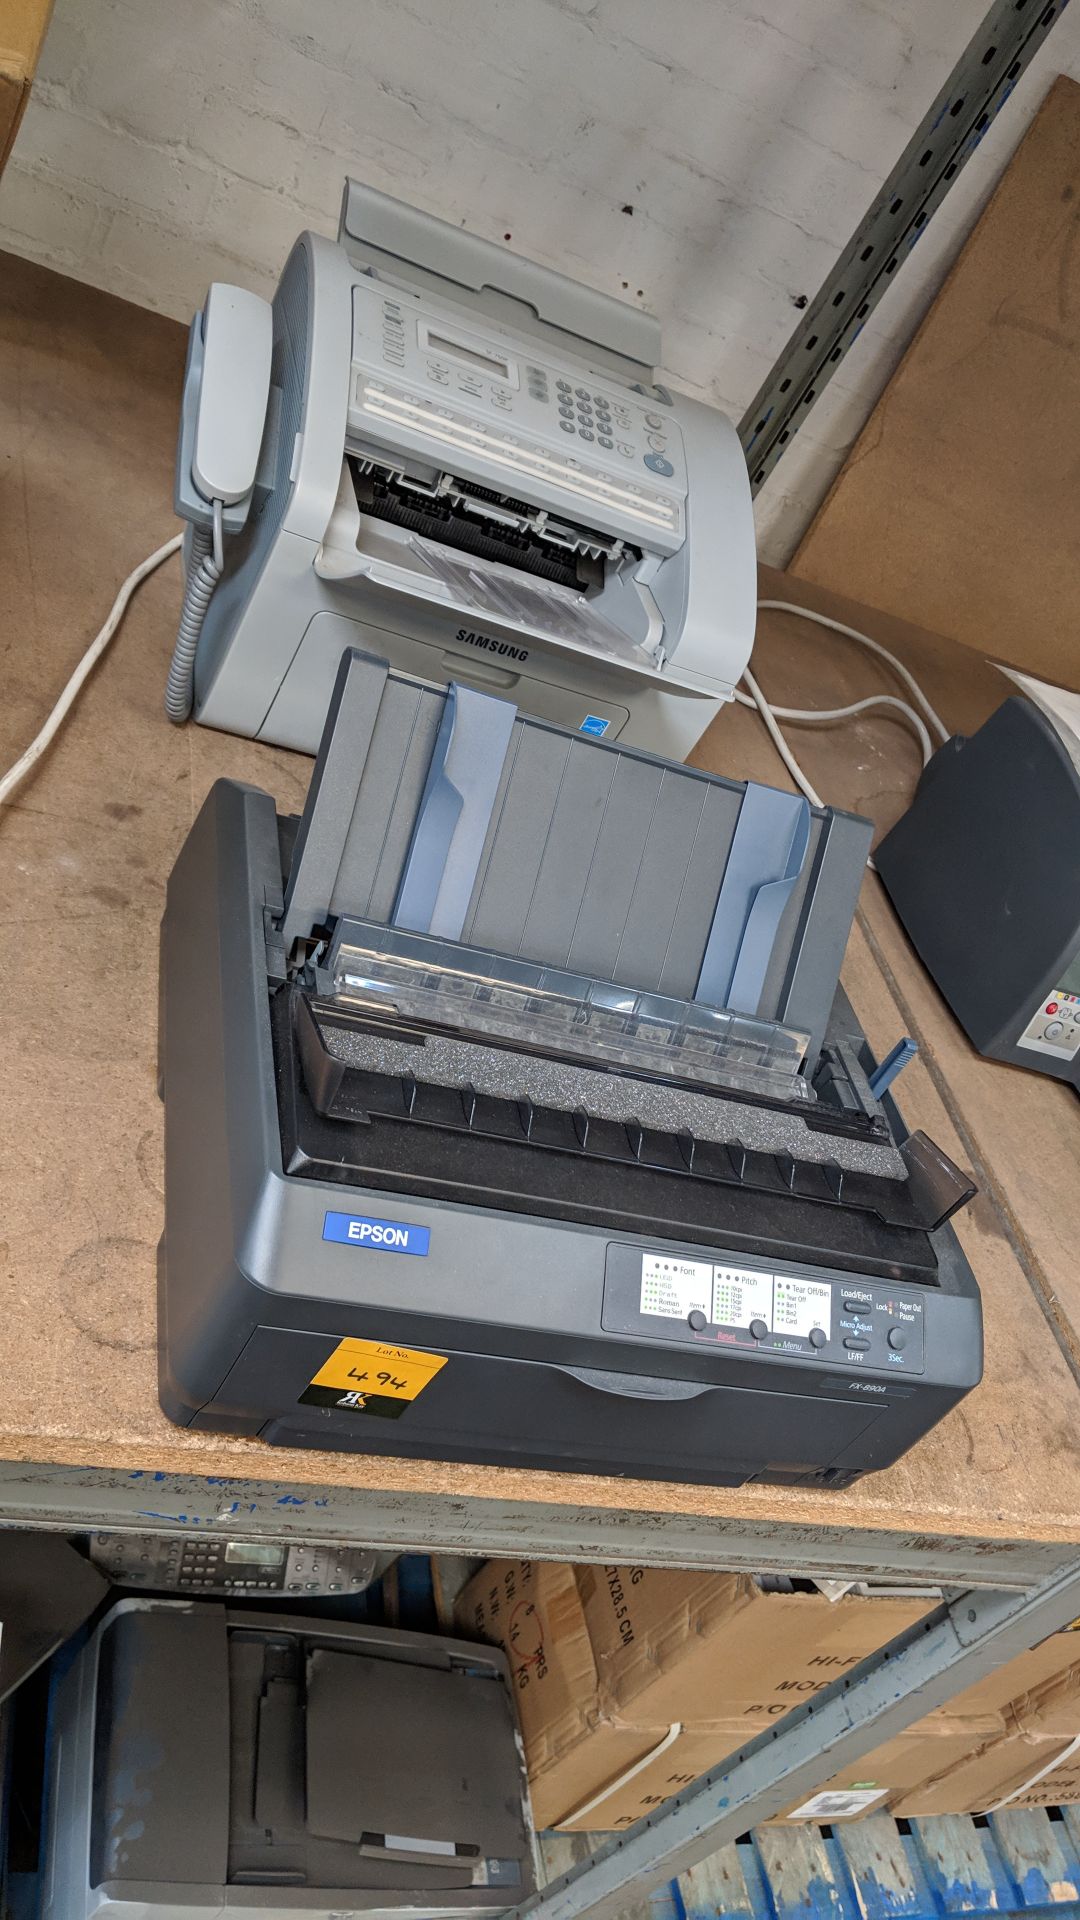 Mixed lot comprising Epson dot matrix printer model FX890A and Samsung fax machine This is one of